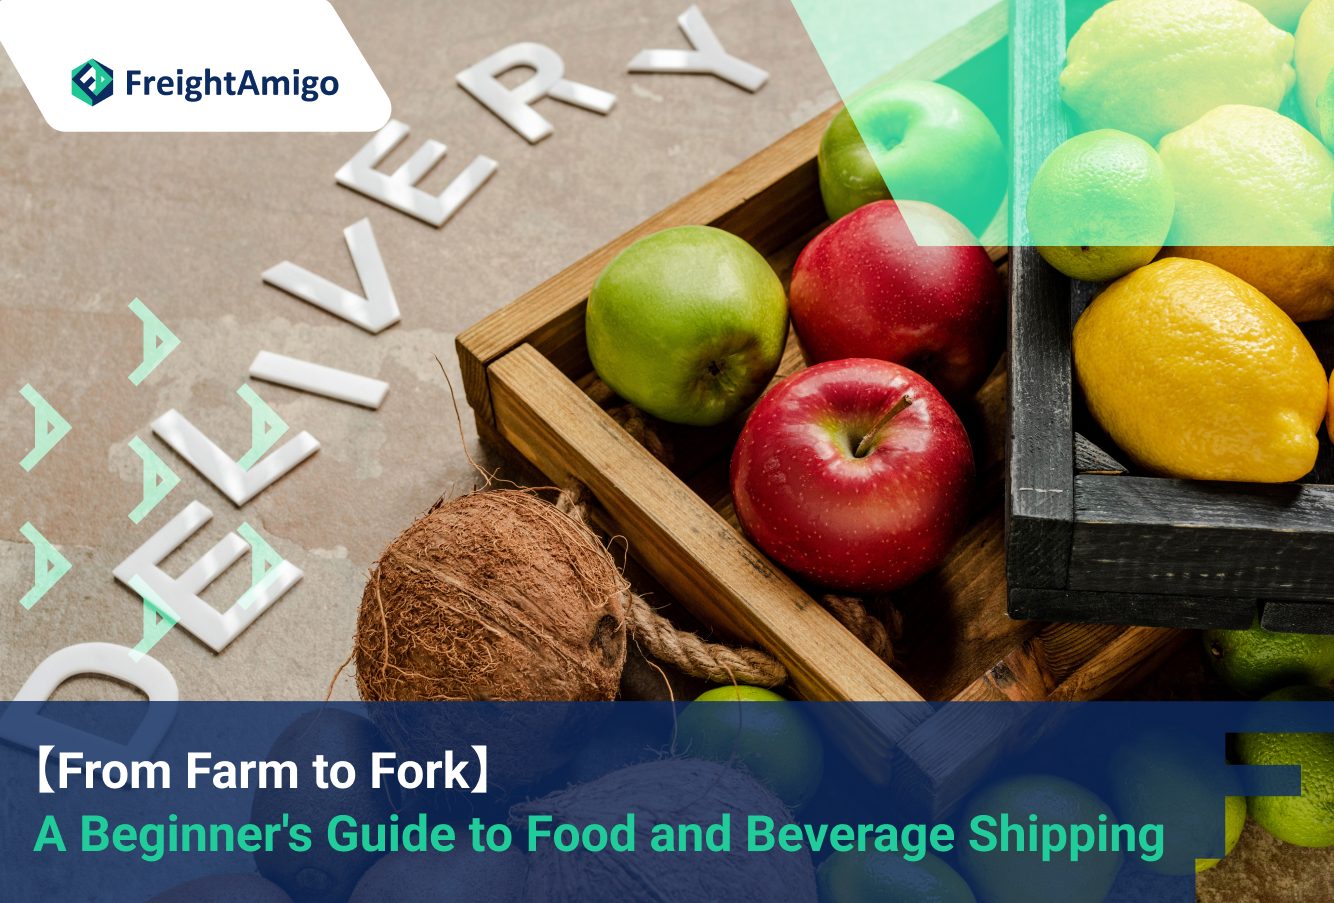 【From Farm to Fork】 A Beginner’s Guide to Food and Beverage Shipping